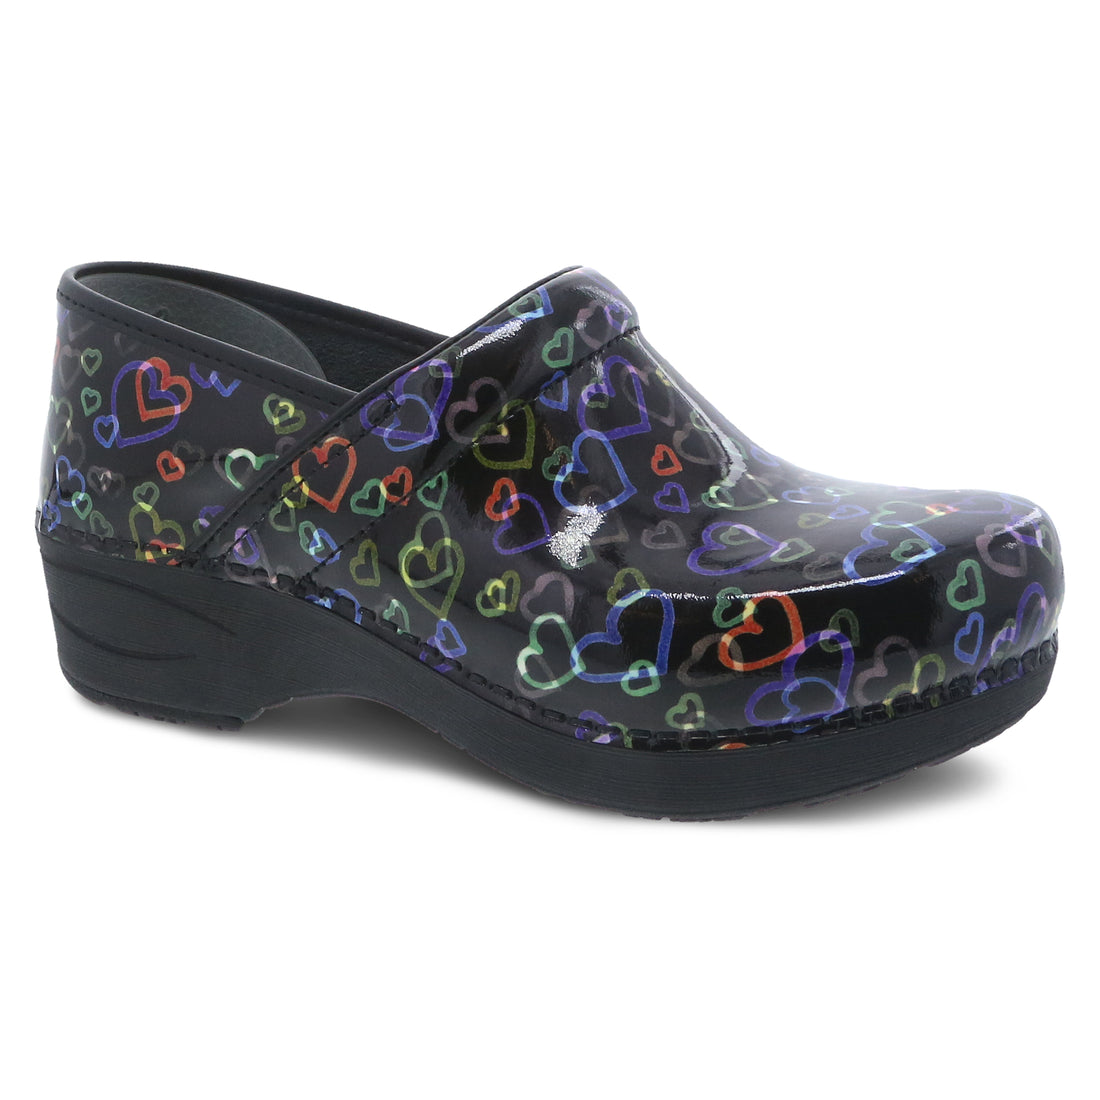 XP 2.0 Floating Hearts Patent Clog